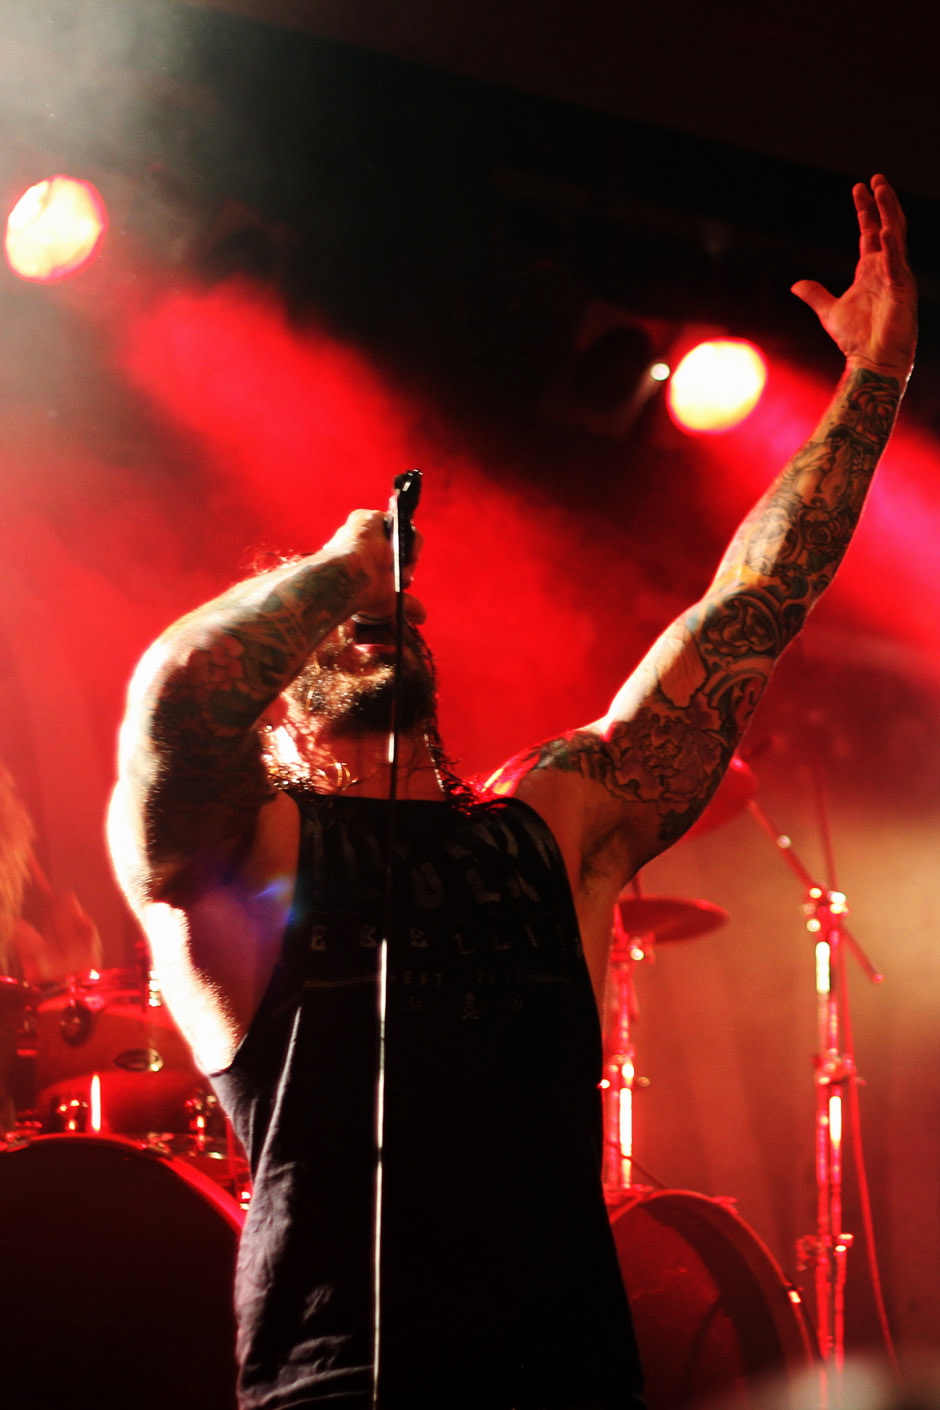 As I Lay Dying live, 06.06.2012 in Karlsruhe